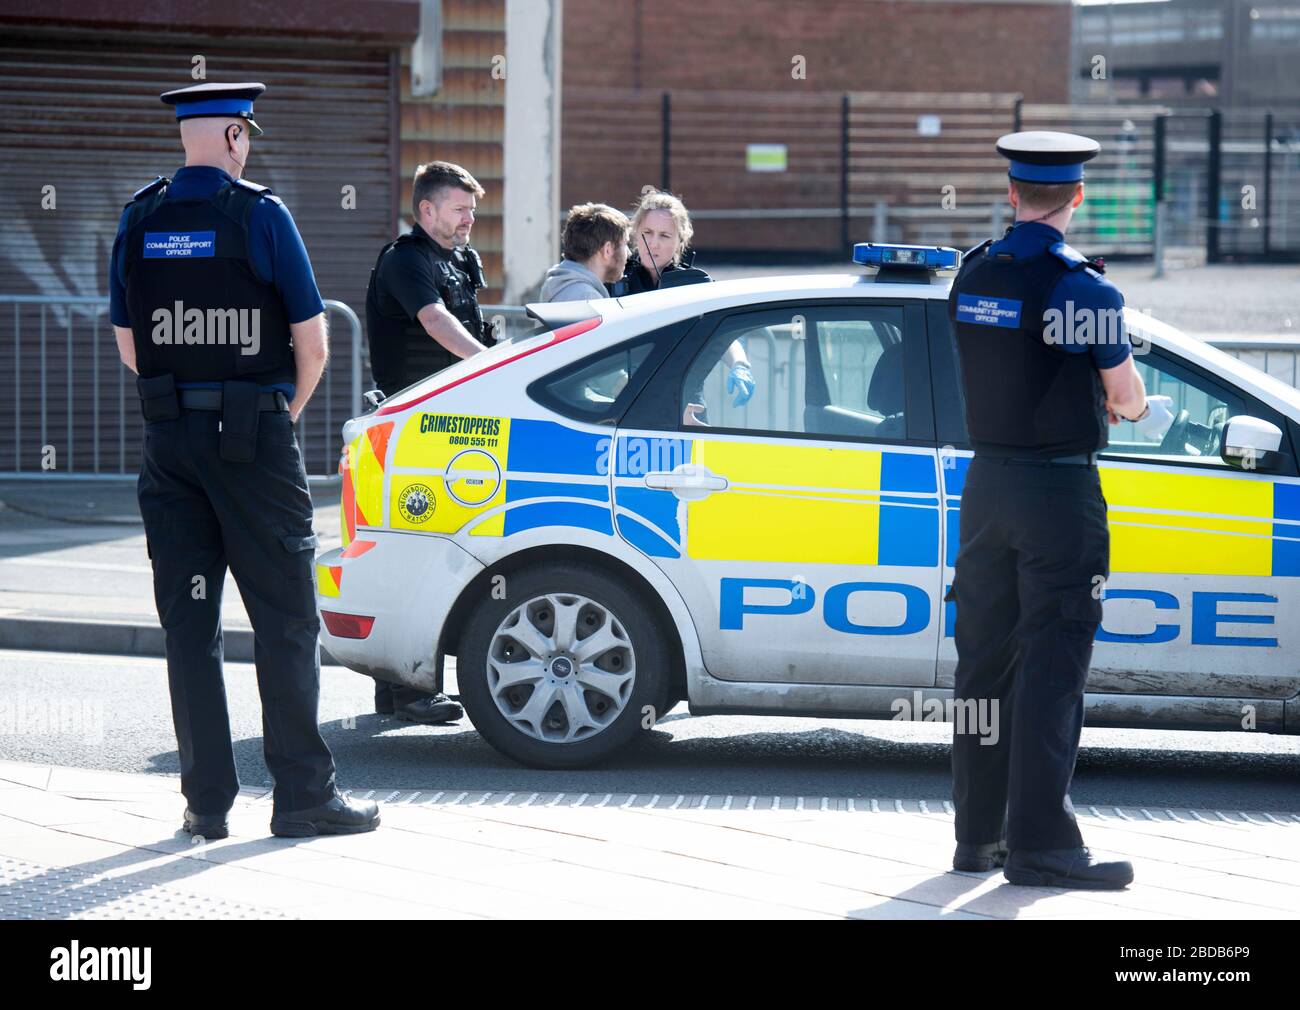 A police patrol with Community Support Officers negotiate with a man and put him in a patrol car in Weston-super-Mare during the Coronavirus lockdown Stock Photo